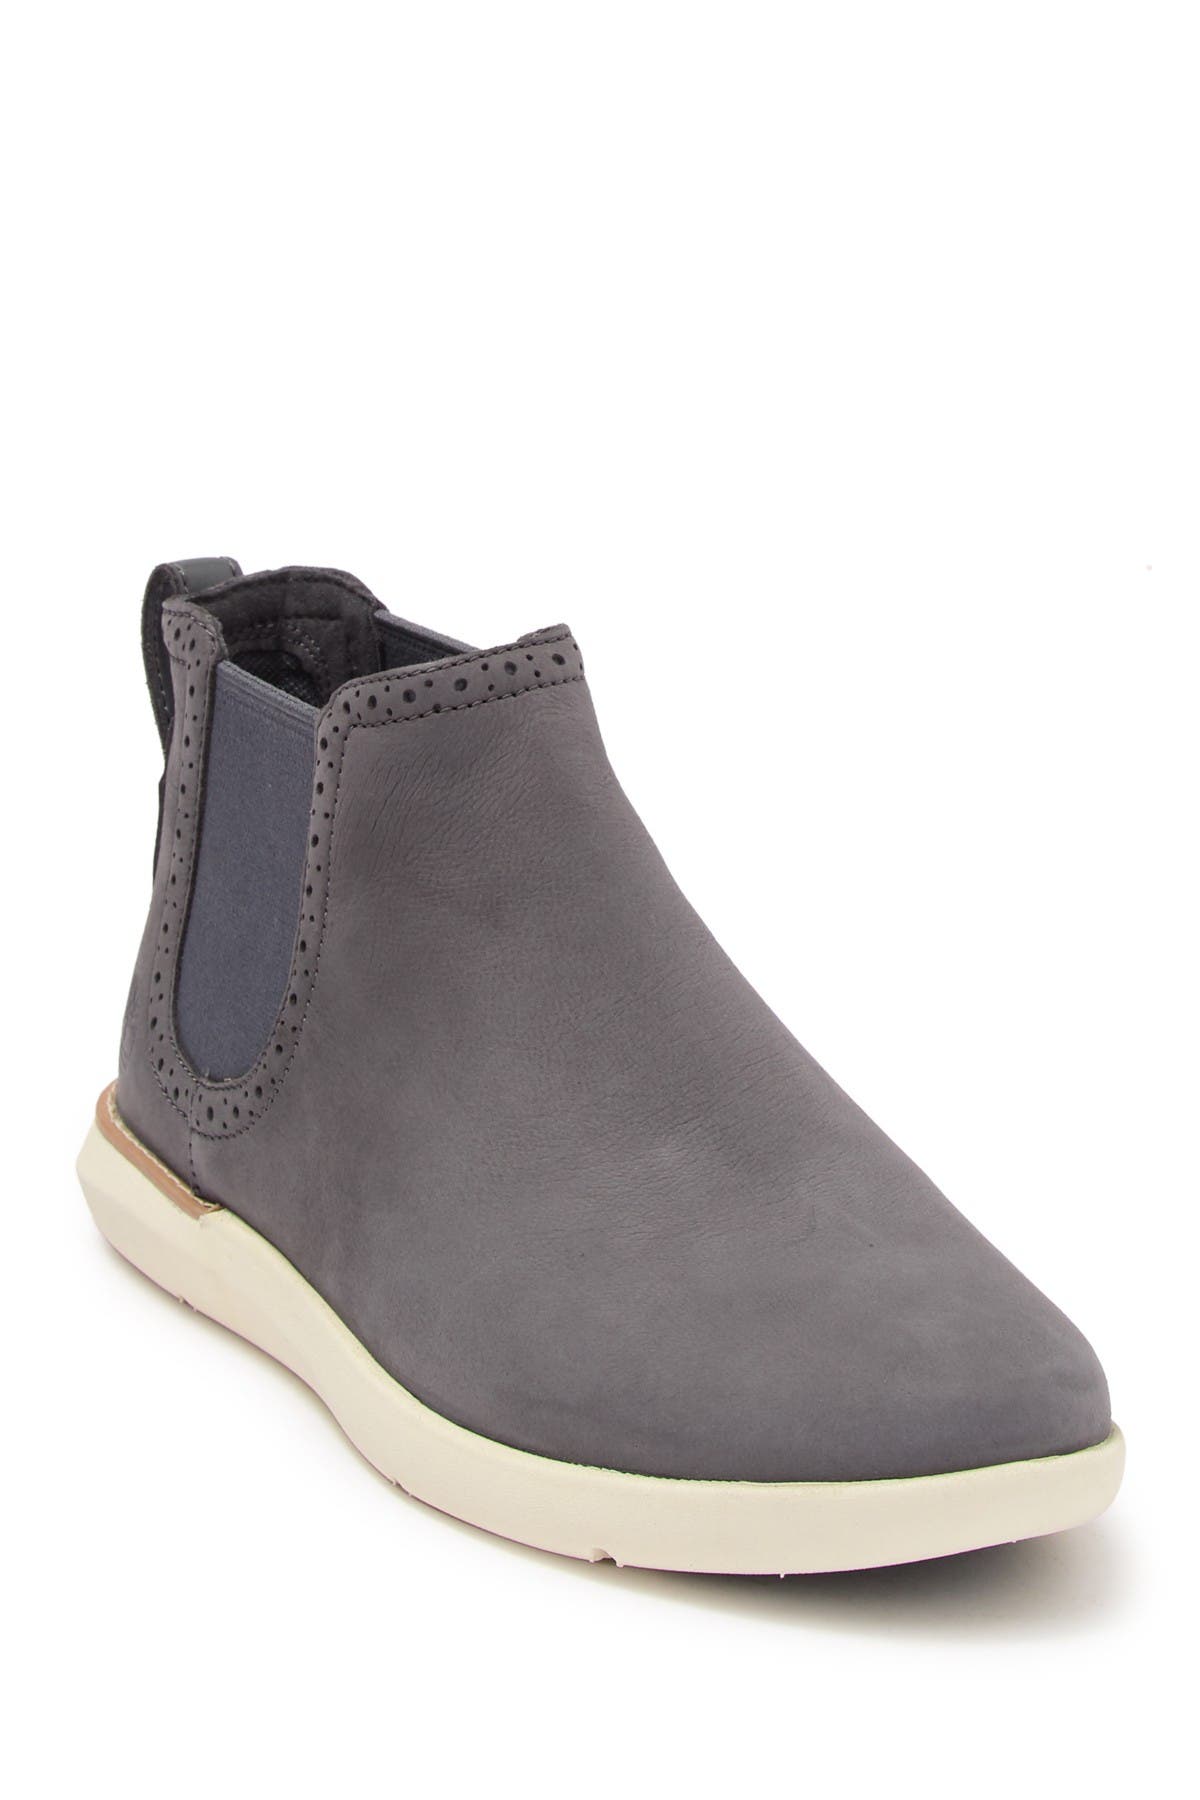 grey timberland chelsea boots